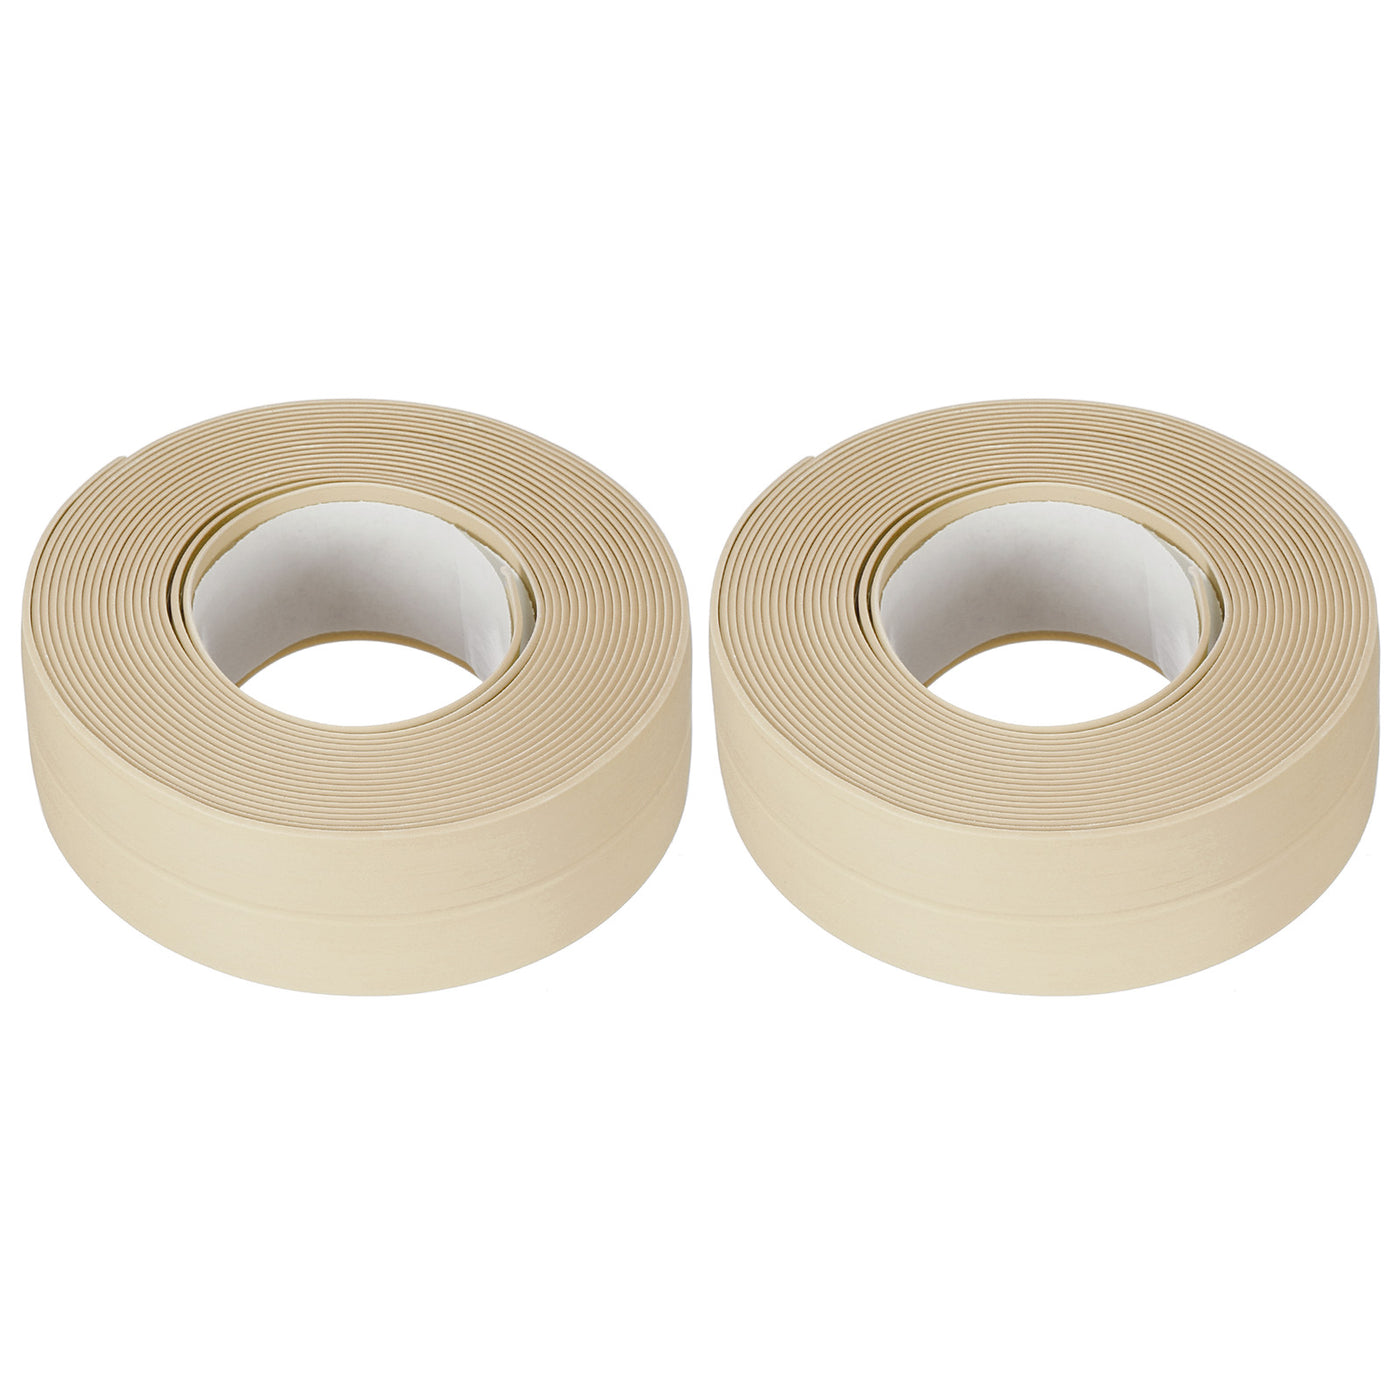 uxcell Uxcell Waterproof Seal Caulk Strip Tape Self Adhesive PVC Sealing Tape for Kitchen